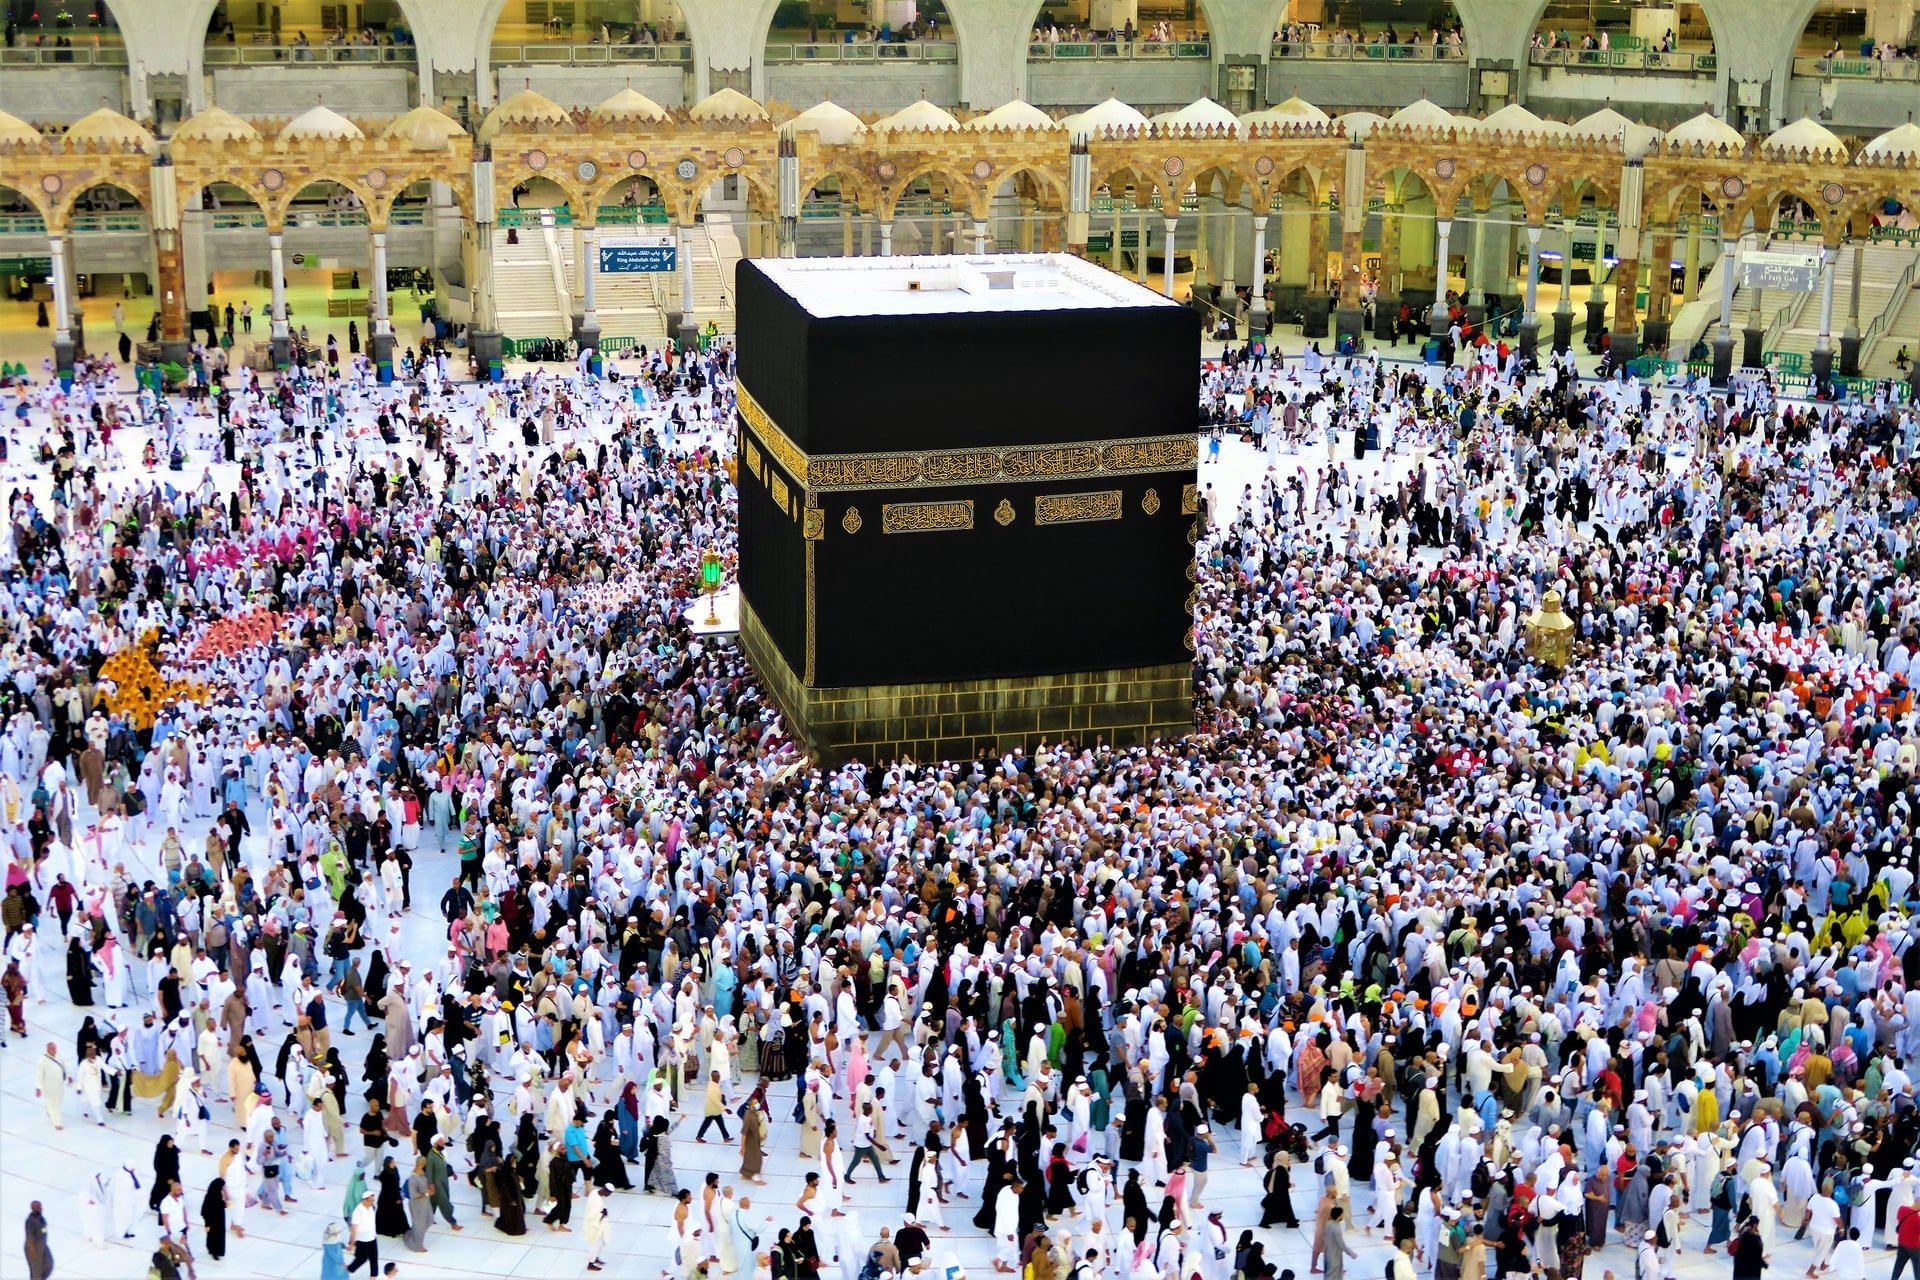 Masjid Al Haram and Masjid Al Nabawi will soon be opened for believers